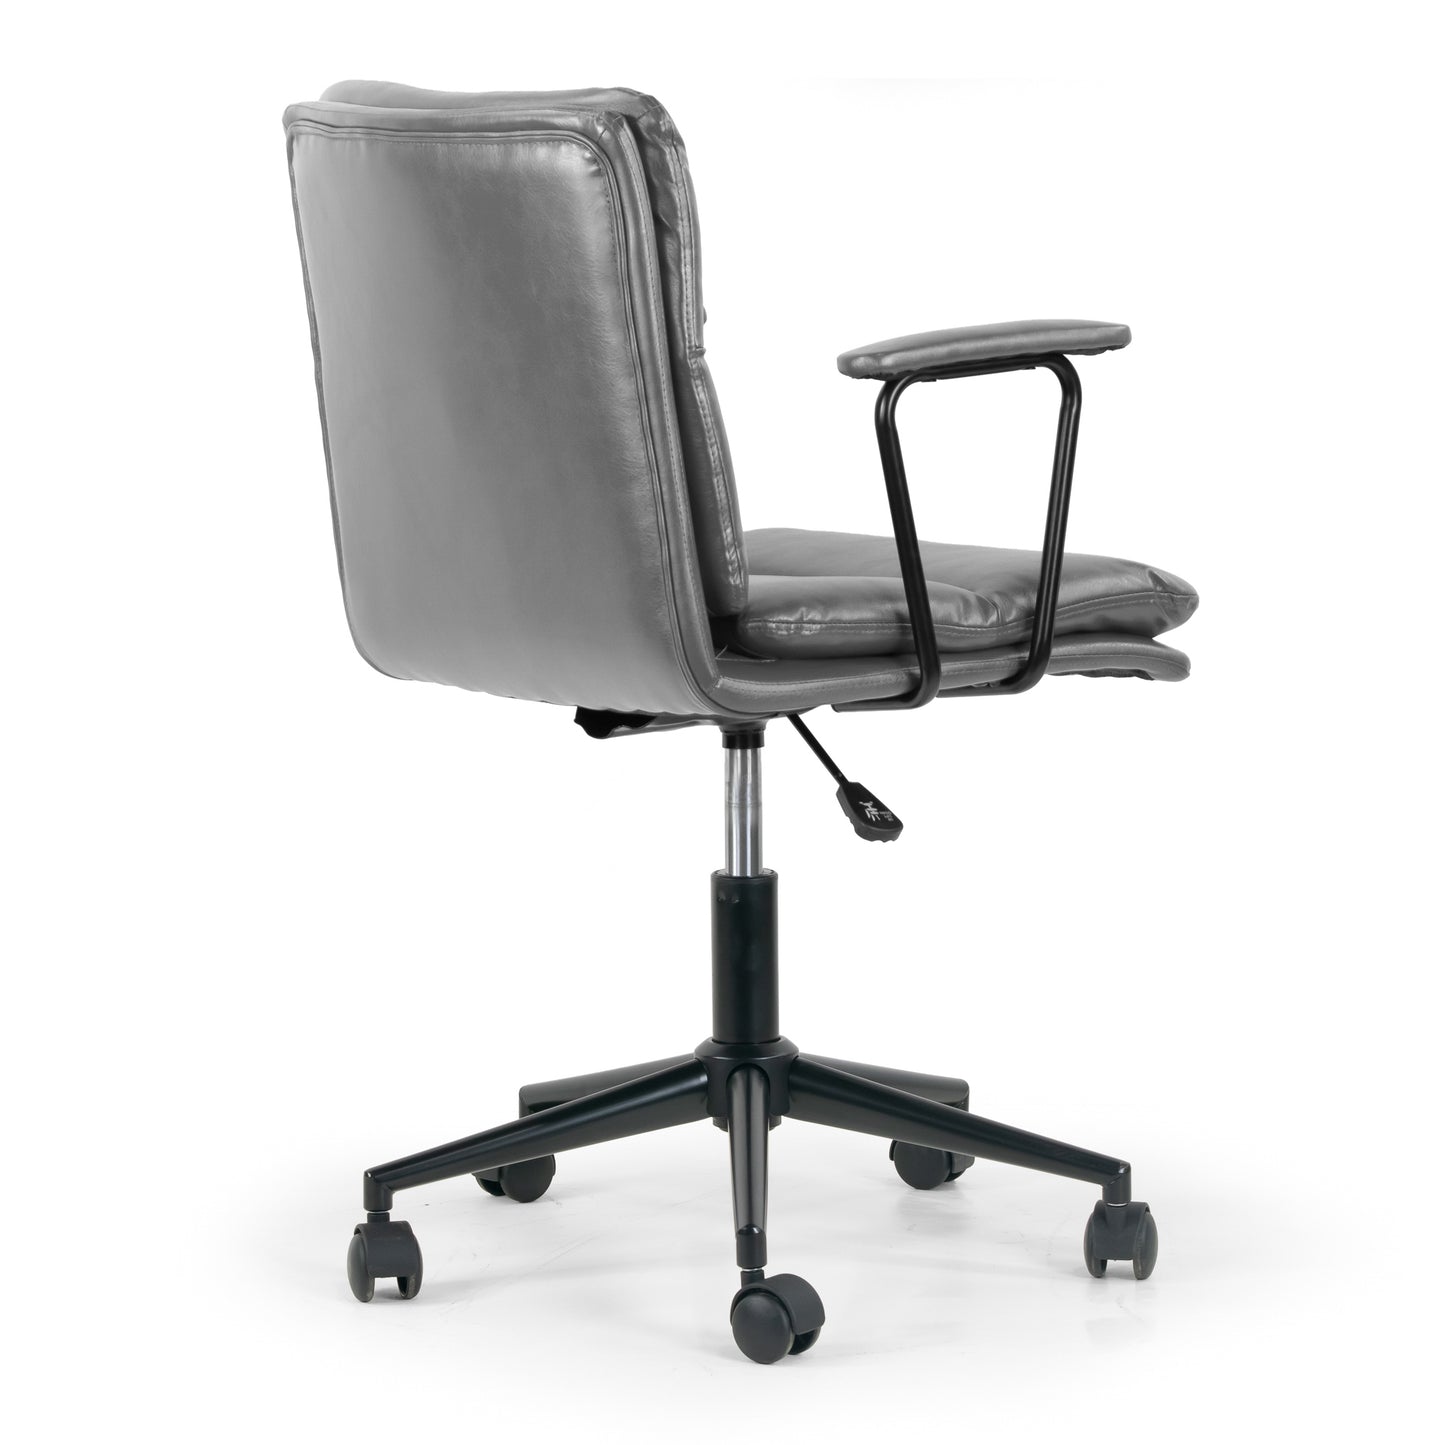 Avalee Grey Faux Leather Adjustable Height Swivel Office Chair with Arms